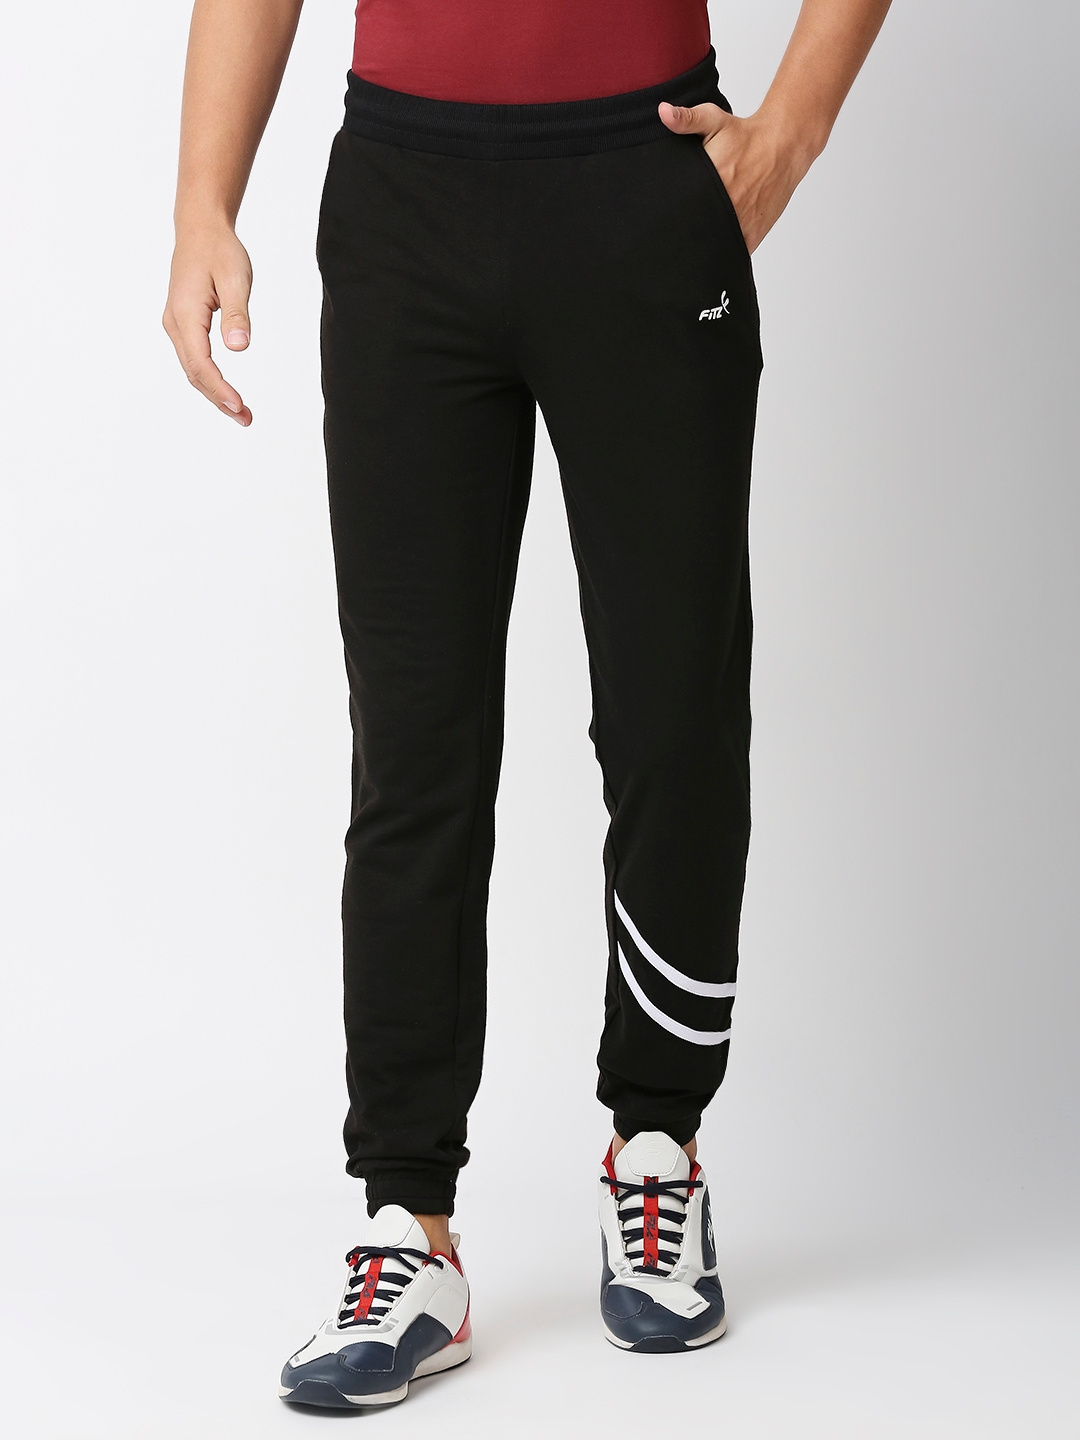 FITZ | Fitz French Terry Solid Slim Fit Joggers Trackpants - Jet Black